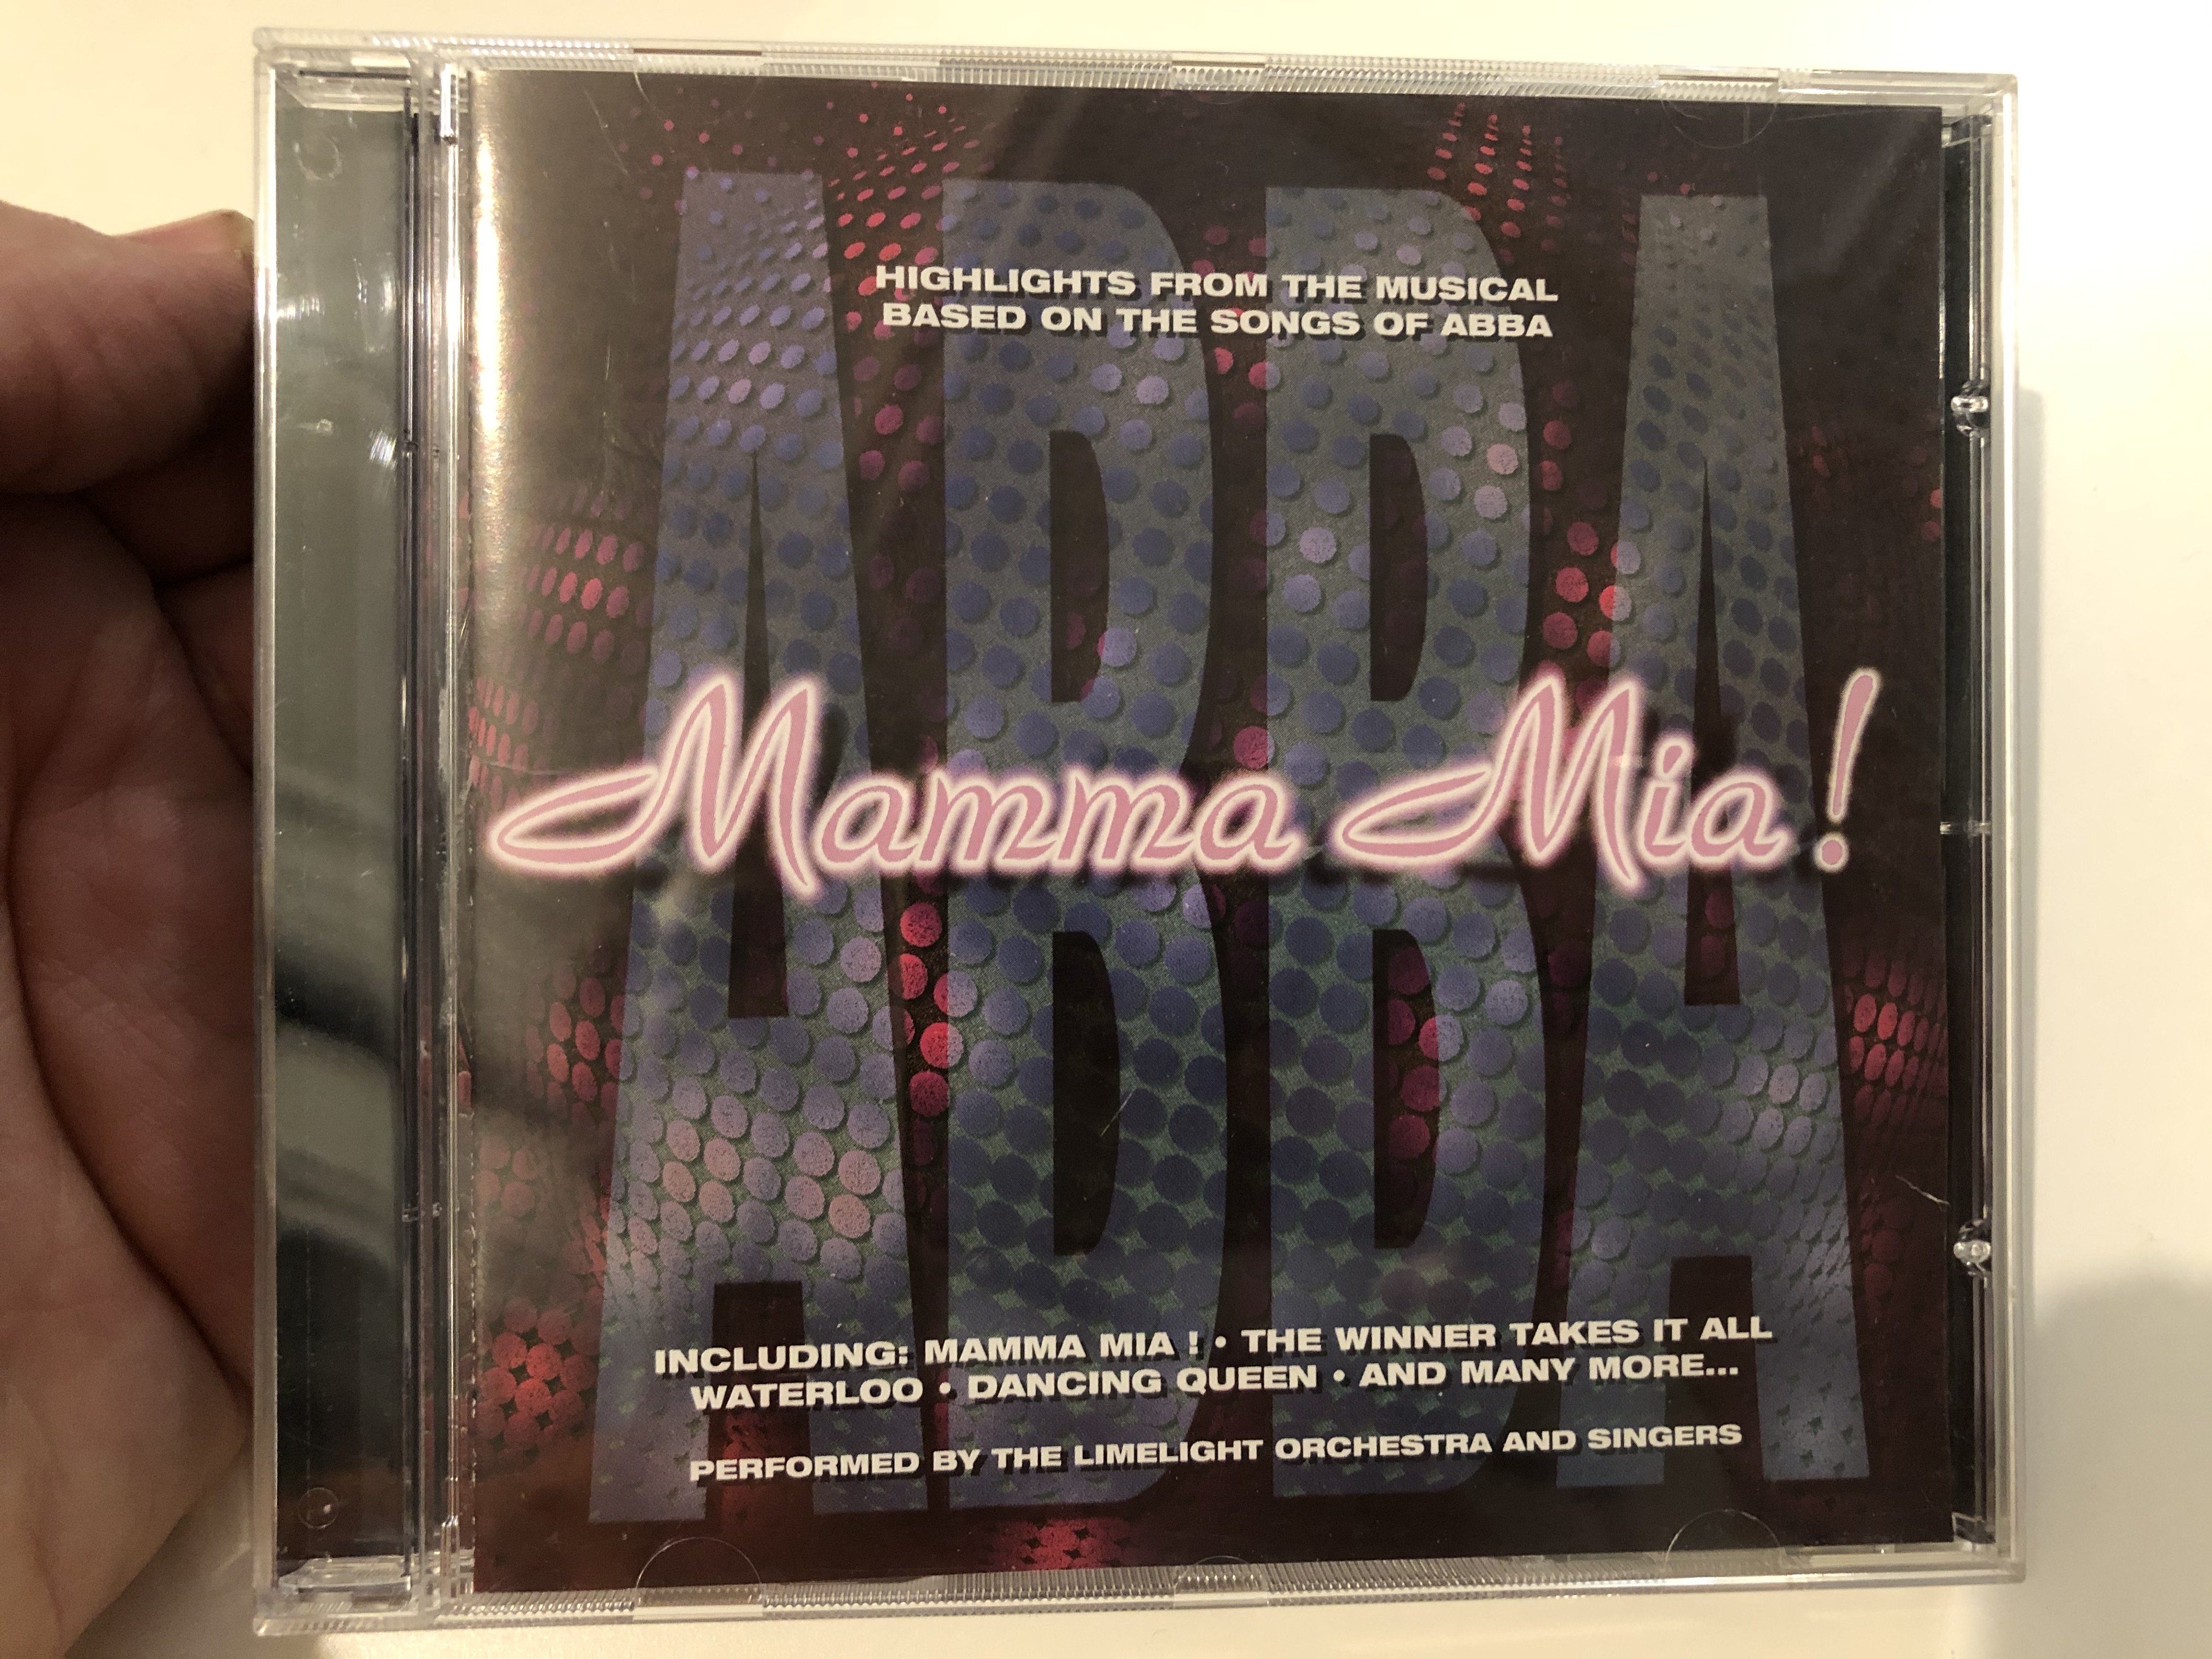 abba-mamma-mia-highlights-from-the-musical-based-on-the-songs-of-abba-including-mamma-mia-the-winner-takes-it-all-waterloo-dancing-queen-and-many-more...-s.p.-series-audio-cd-1999-1-.jpg